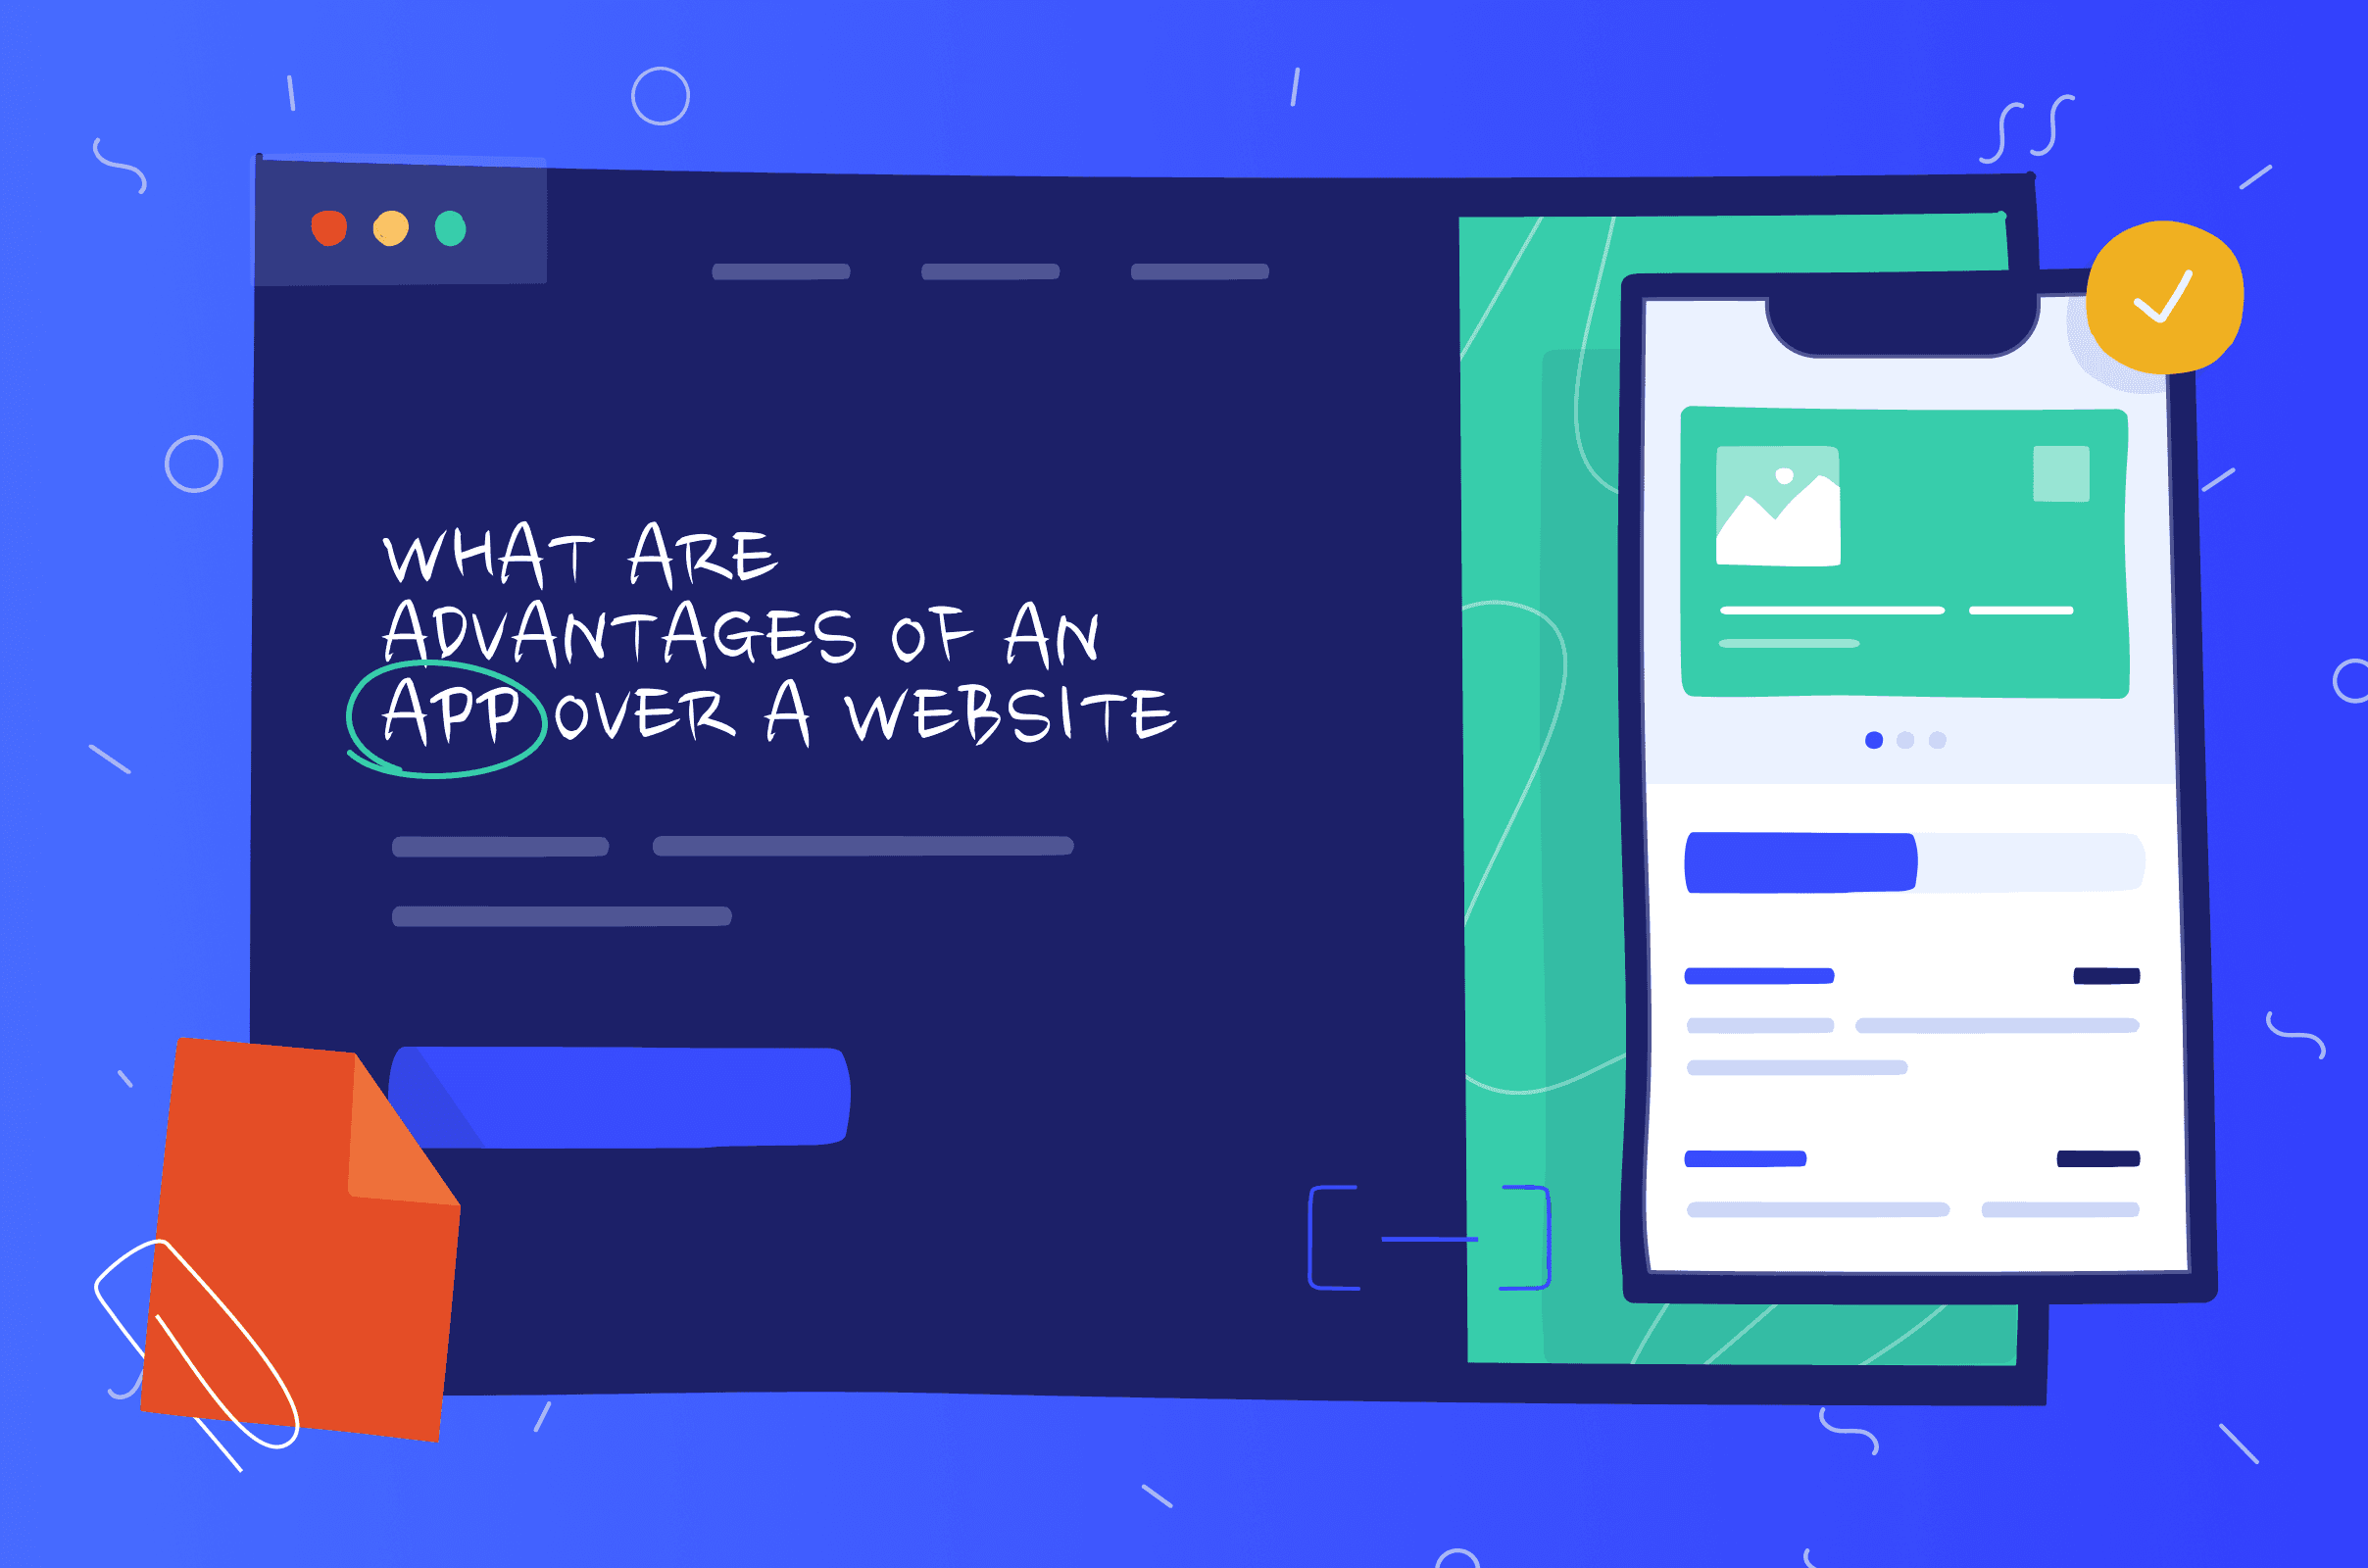 What are the advantages of an app over a website?